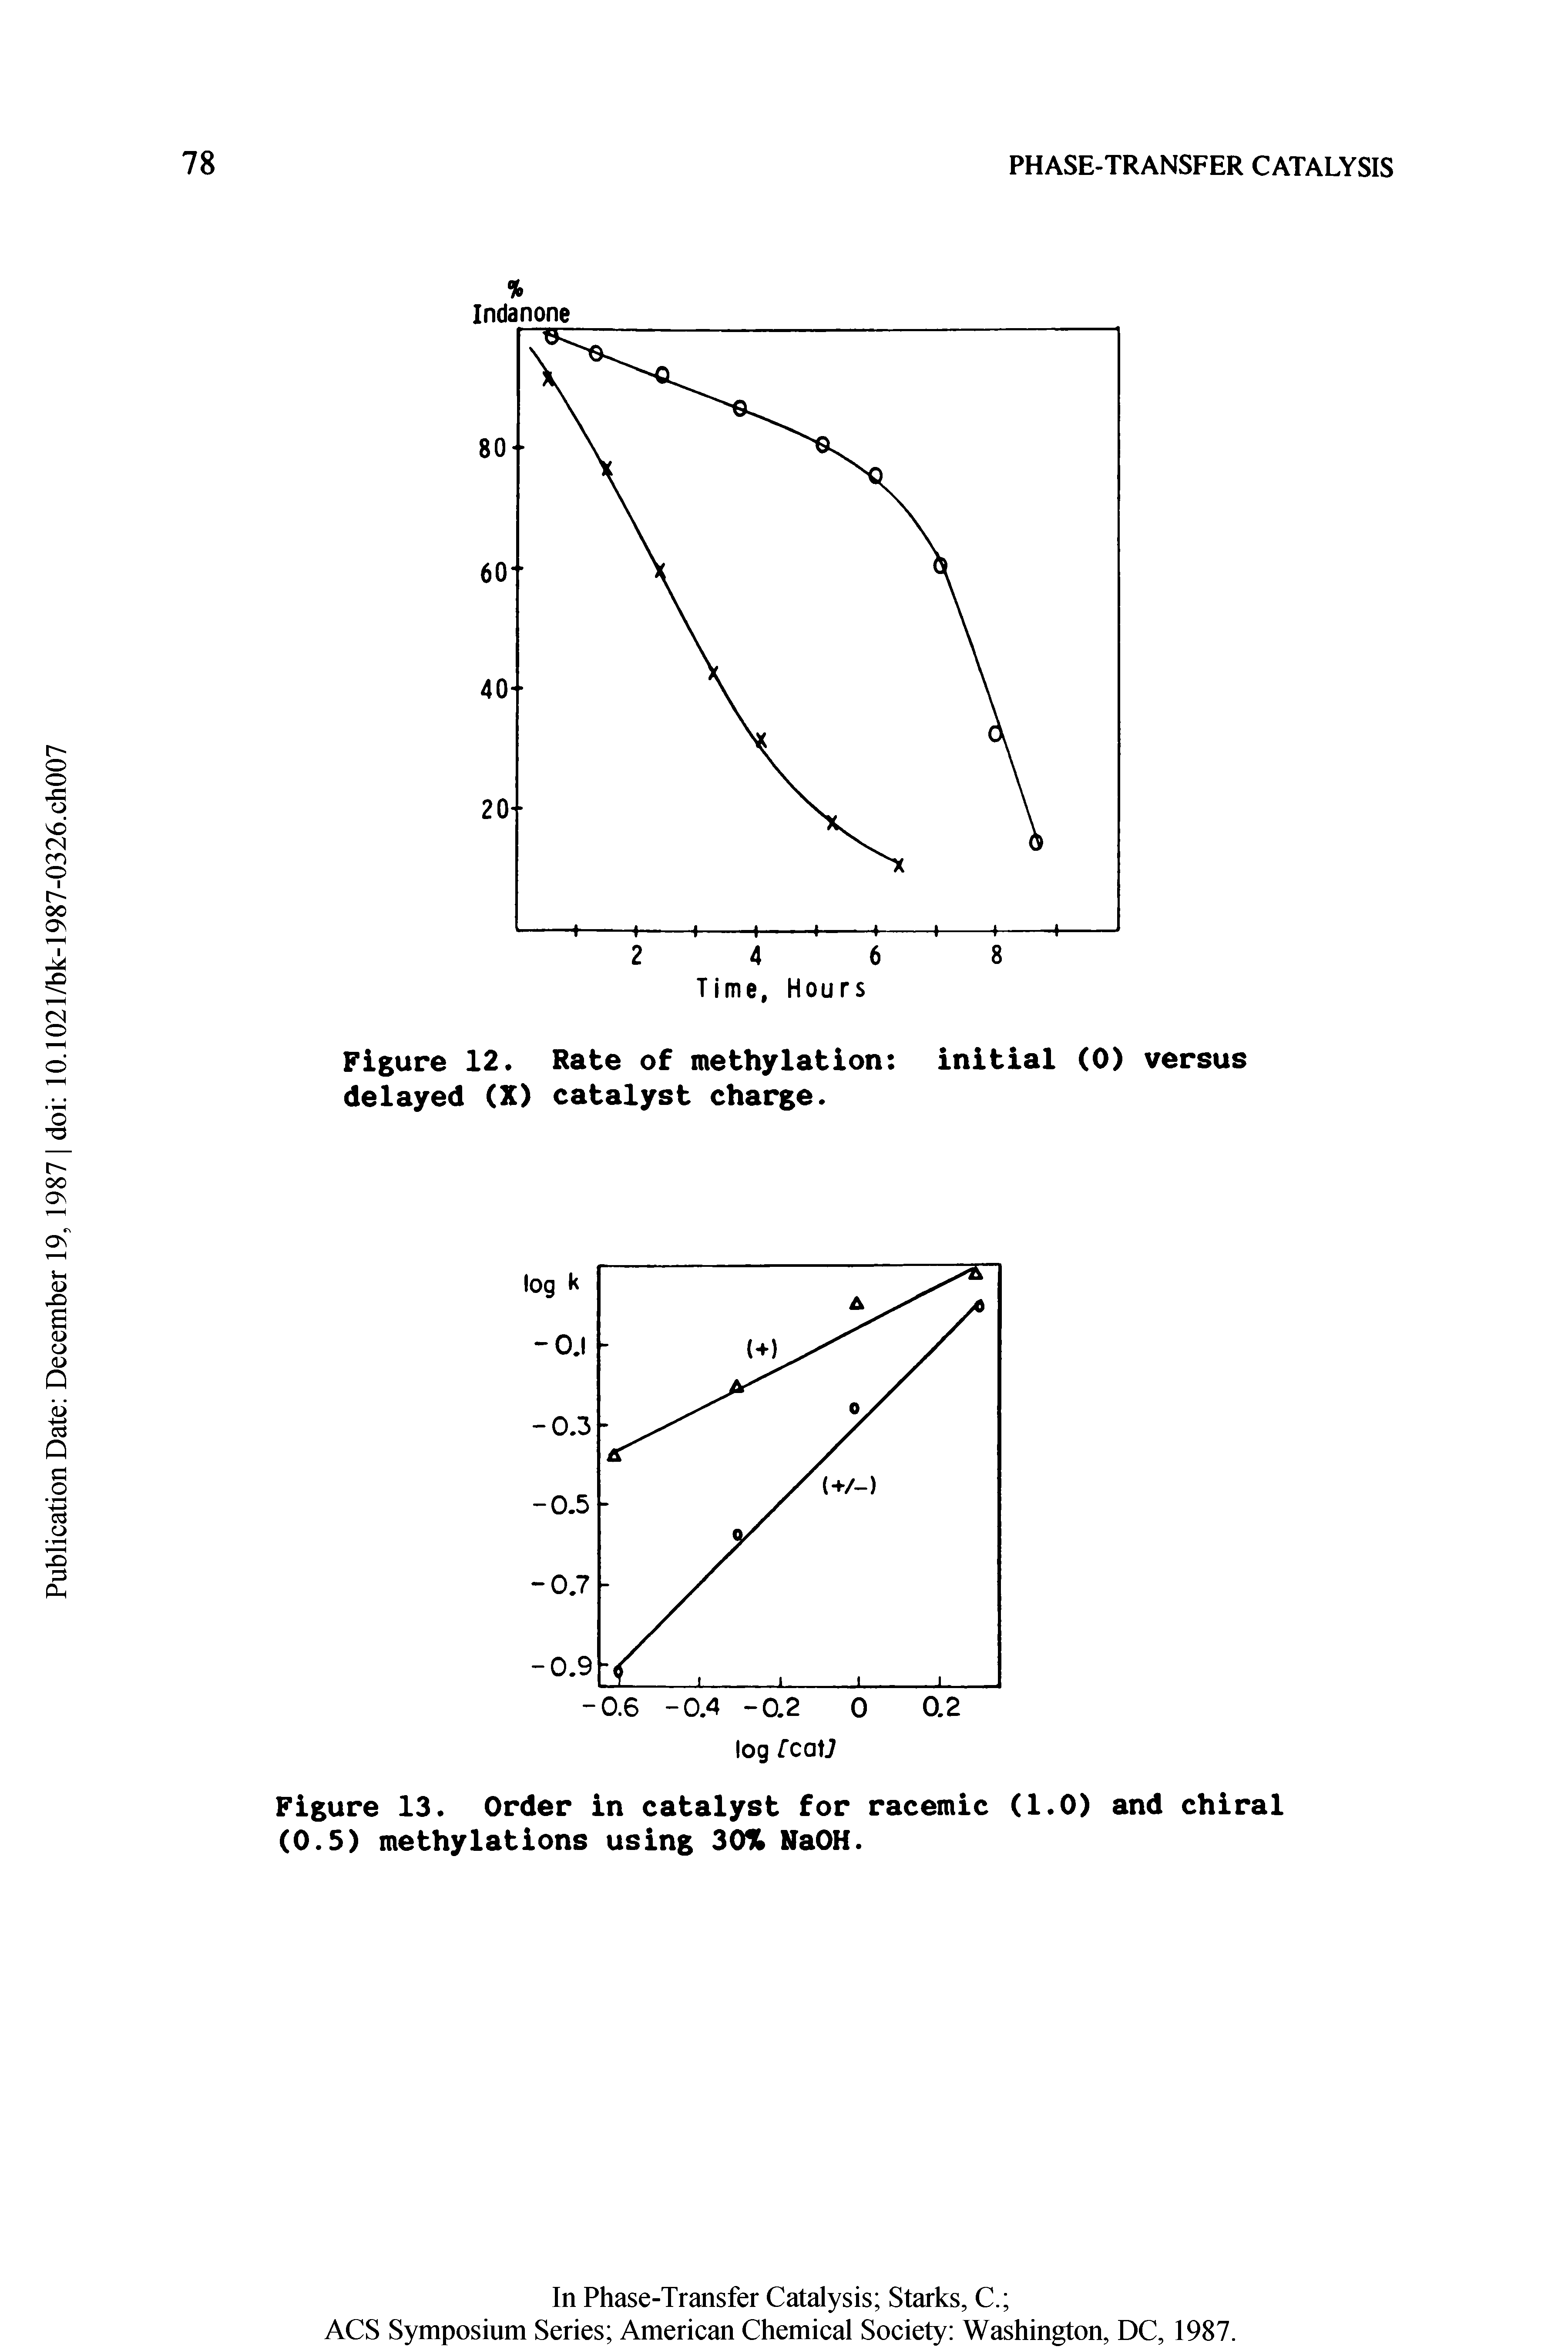 Figure 12. Rate of methylation initial (0) versus delayed (X) catalyst charge.